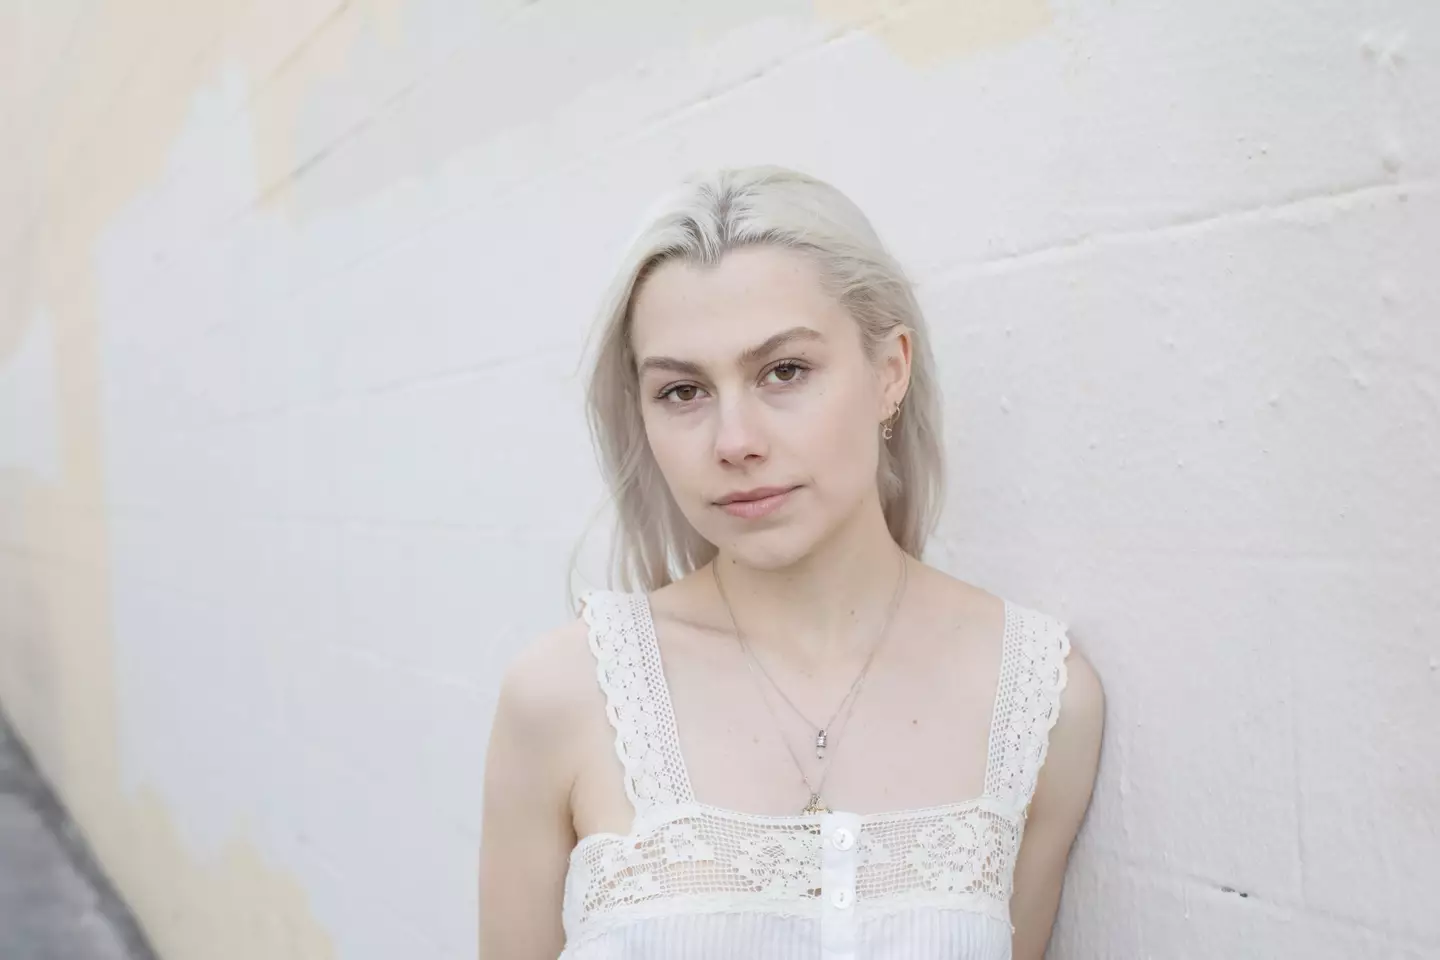 Phoebe Bridgers has hit back at fans who 'bullied' her.